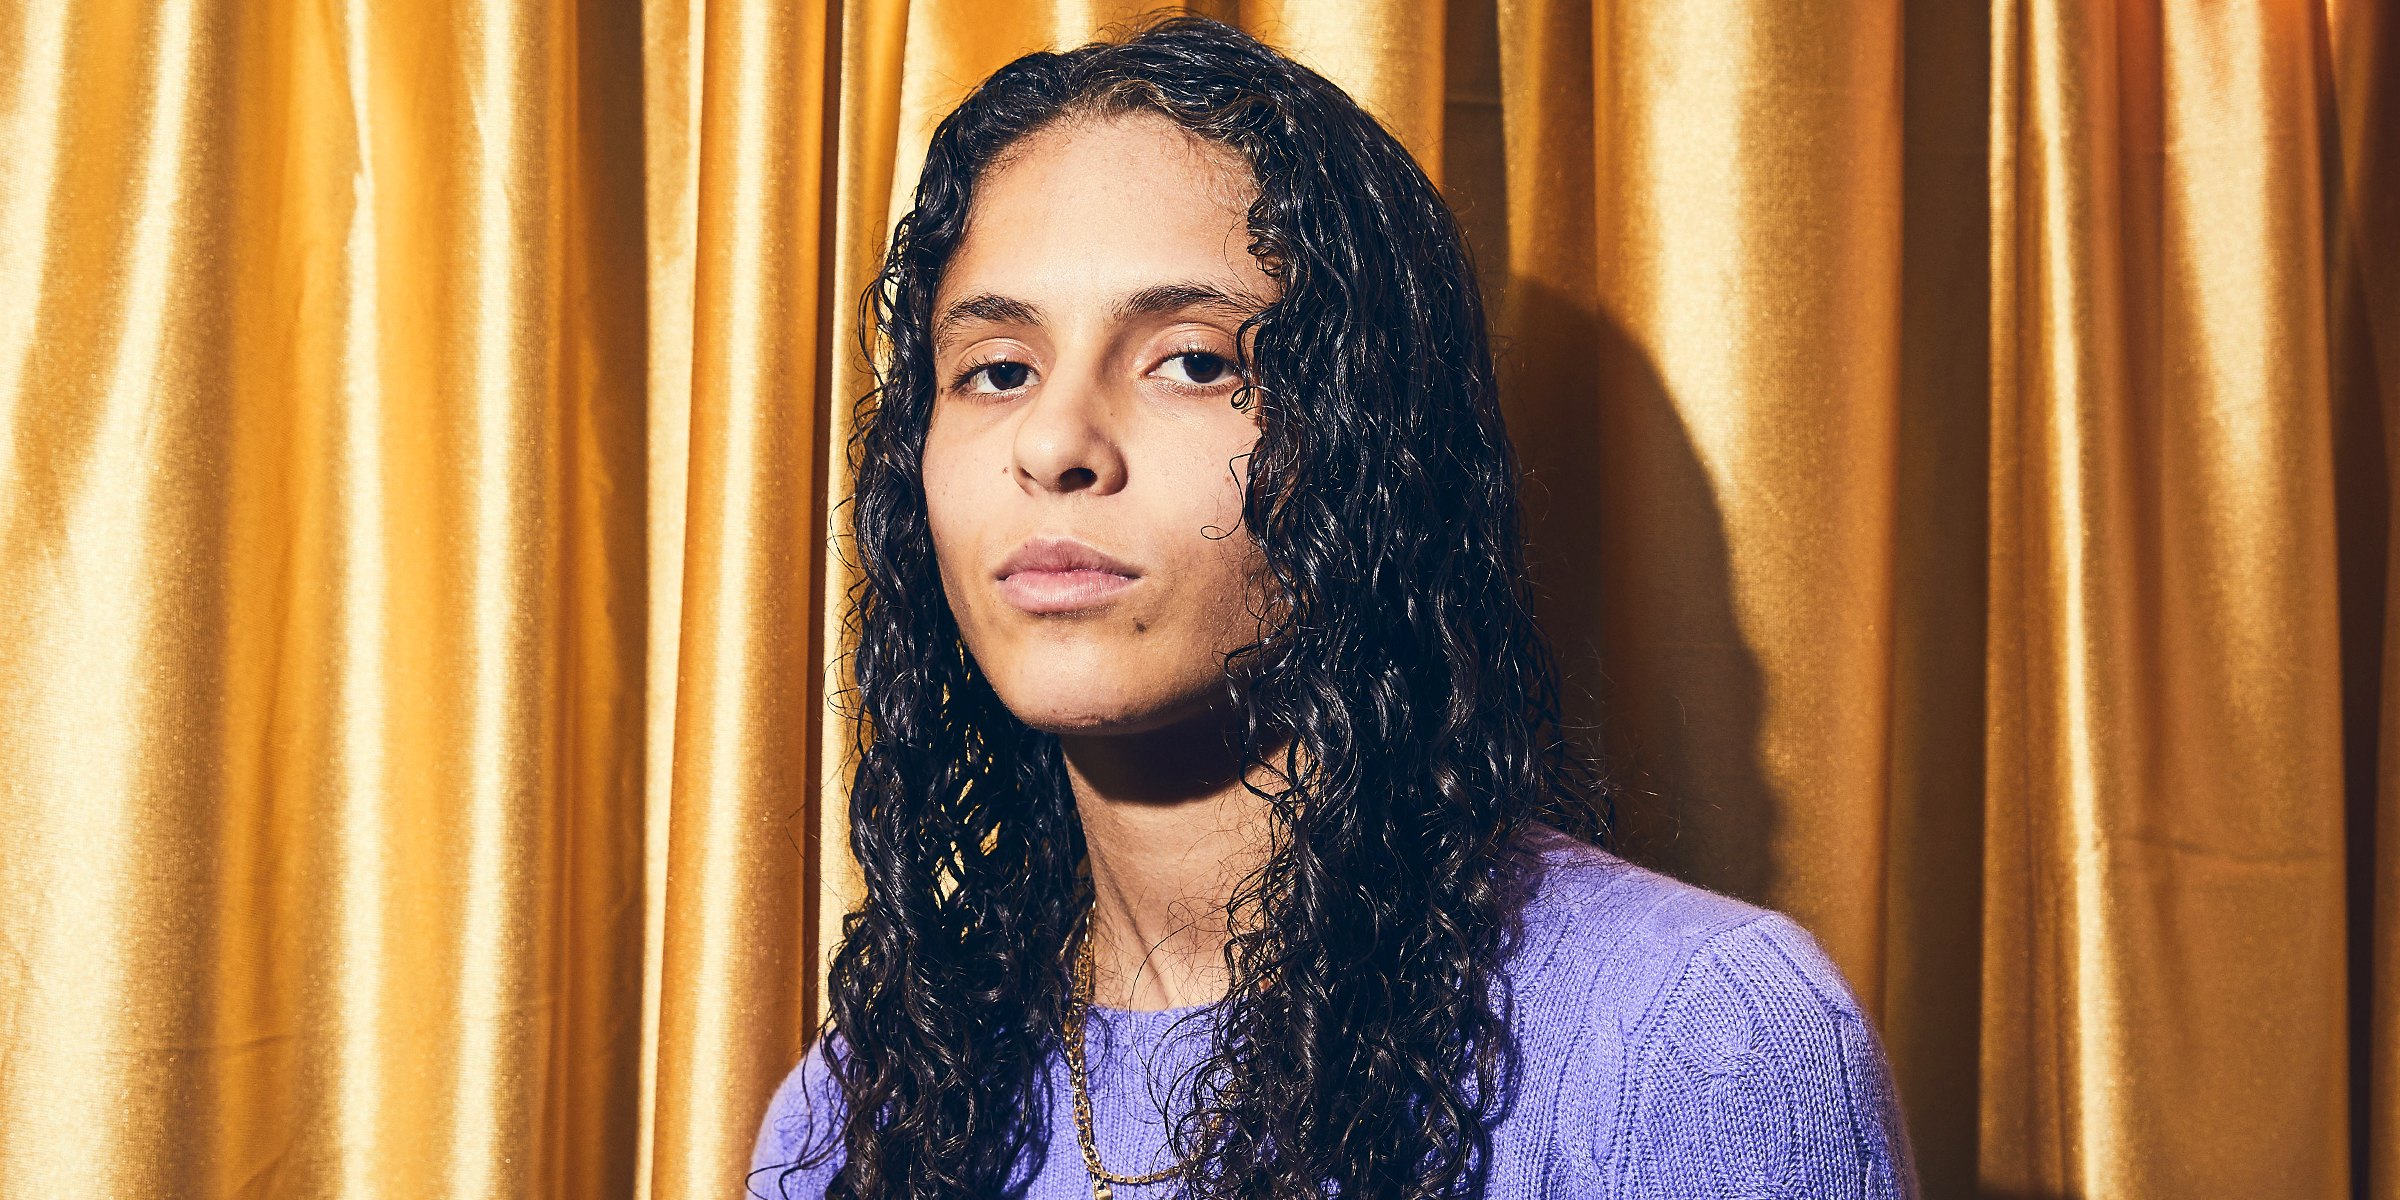 070 Shake | Source: Getty Images